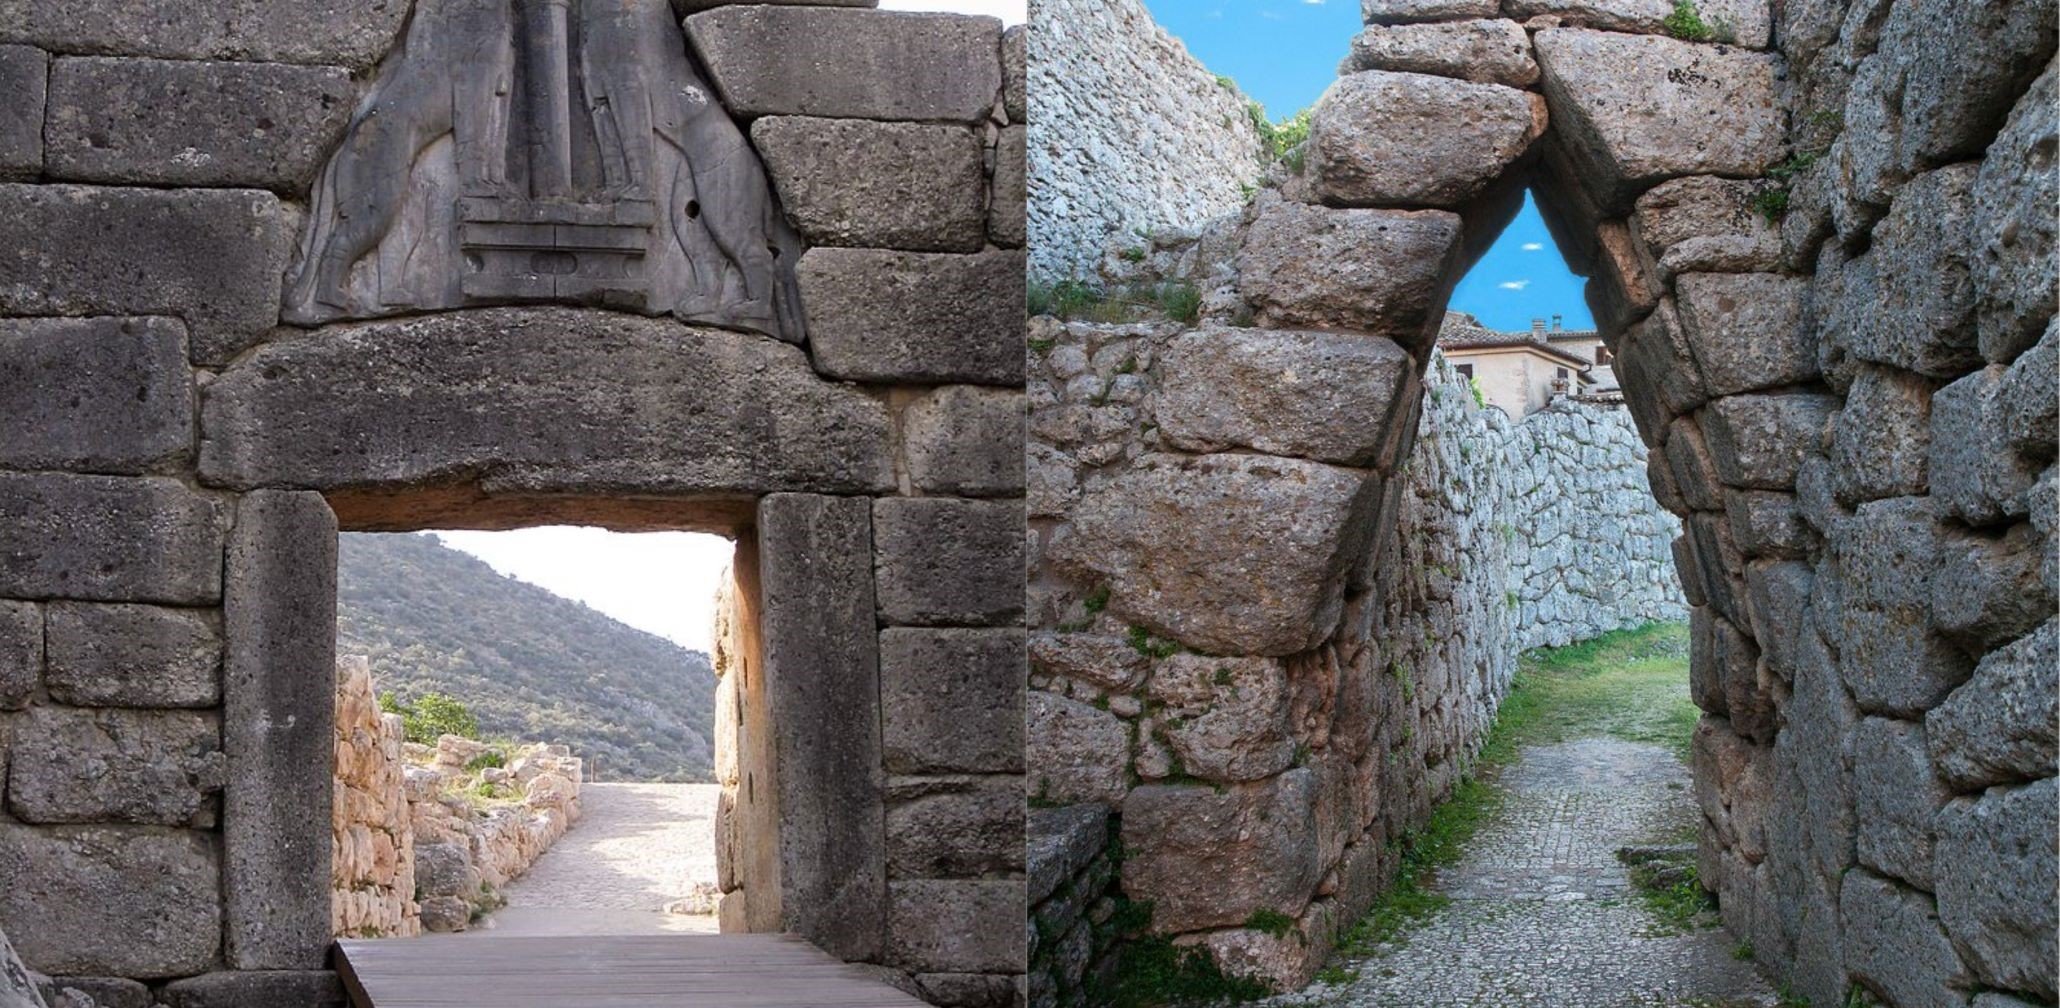 cyclopean walls in italy and mycenaen lion gate, Greece